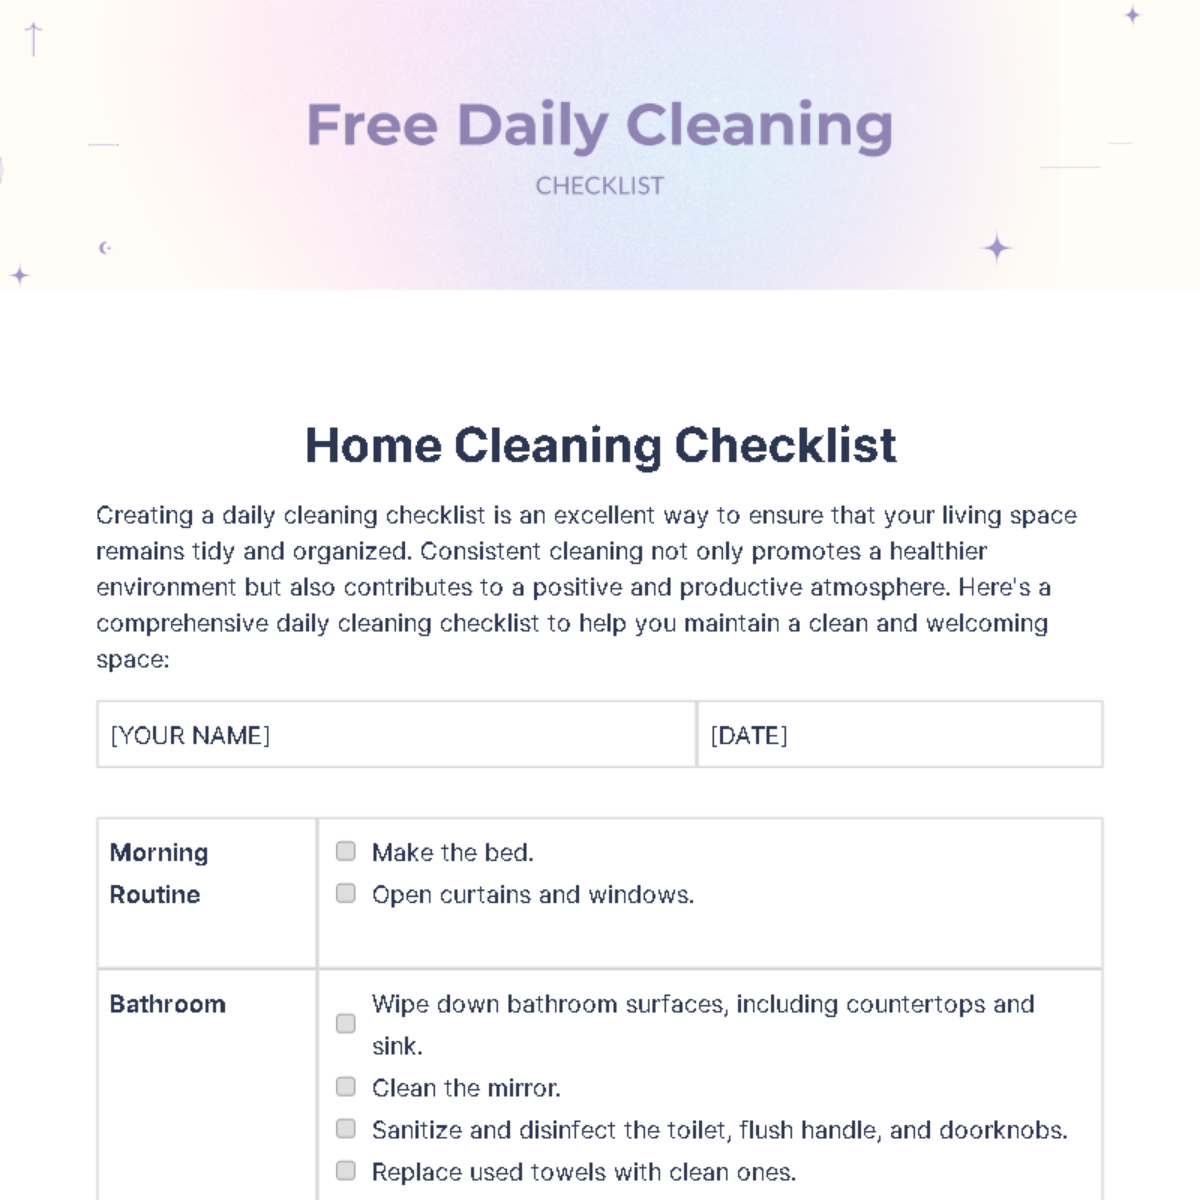 Daily Cleaning Checklist Template